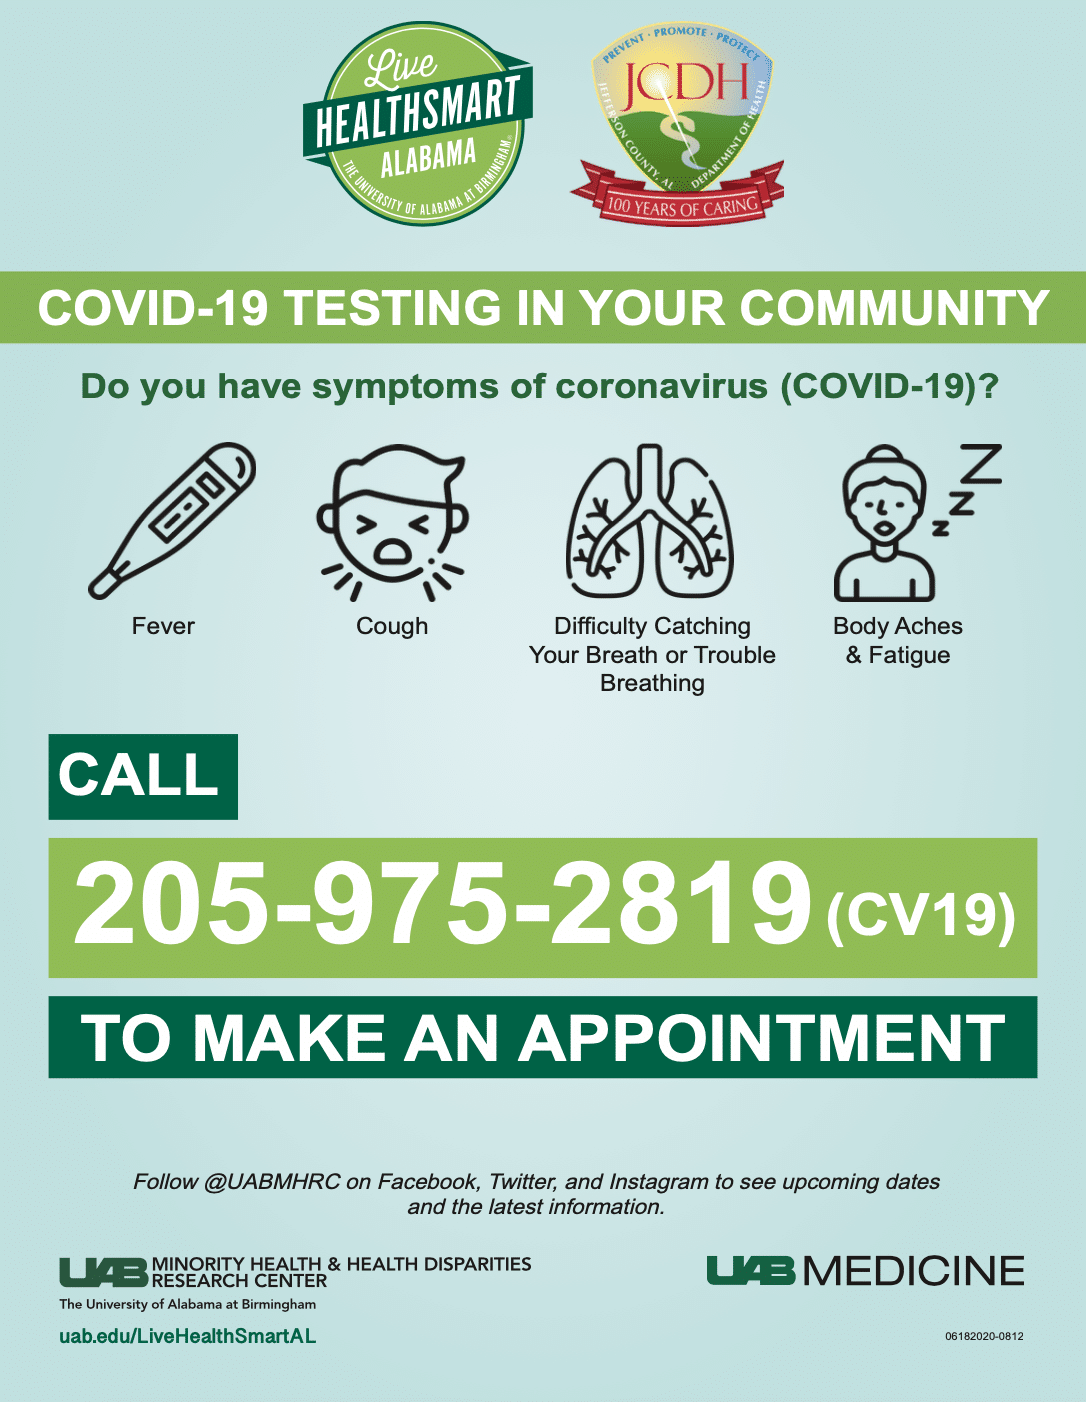 COVID testing in the community